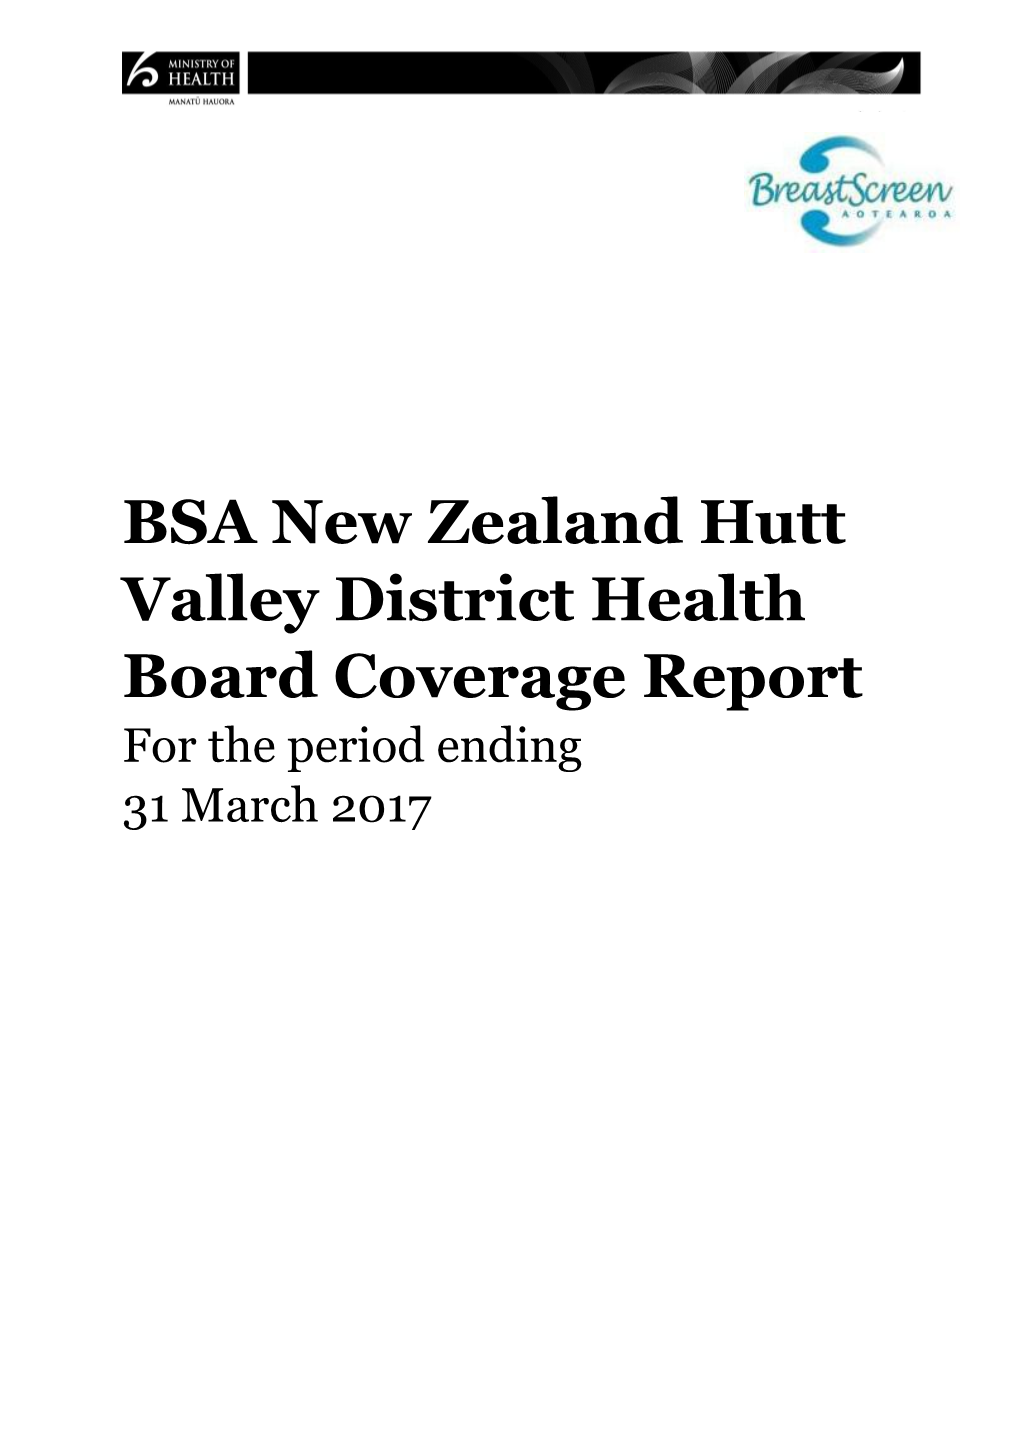 Bsanew Zealand Hutt Valley District Health Boardcoverage Report